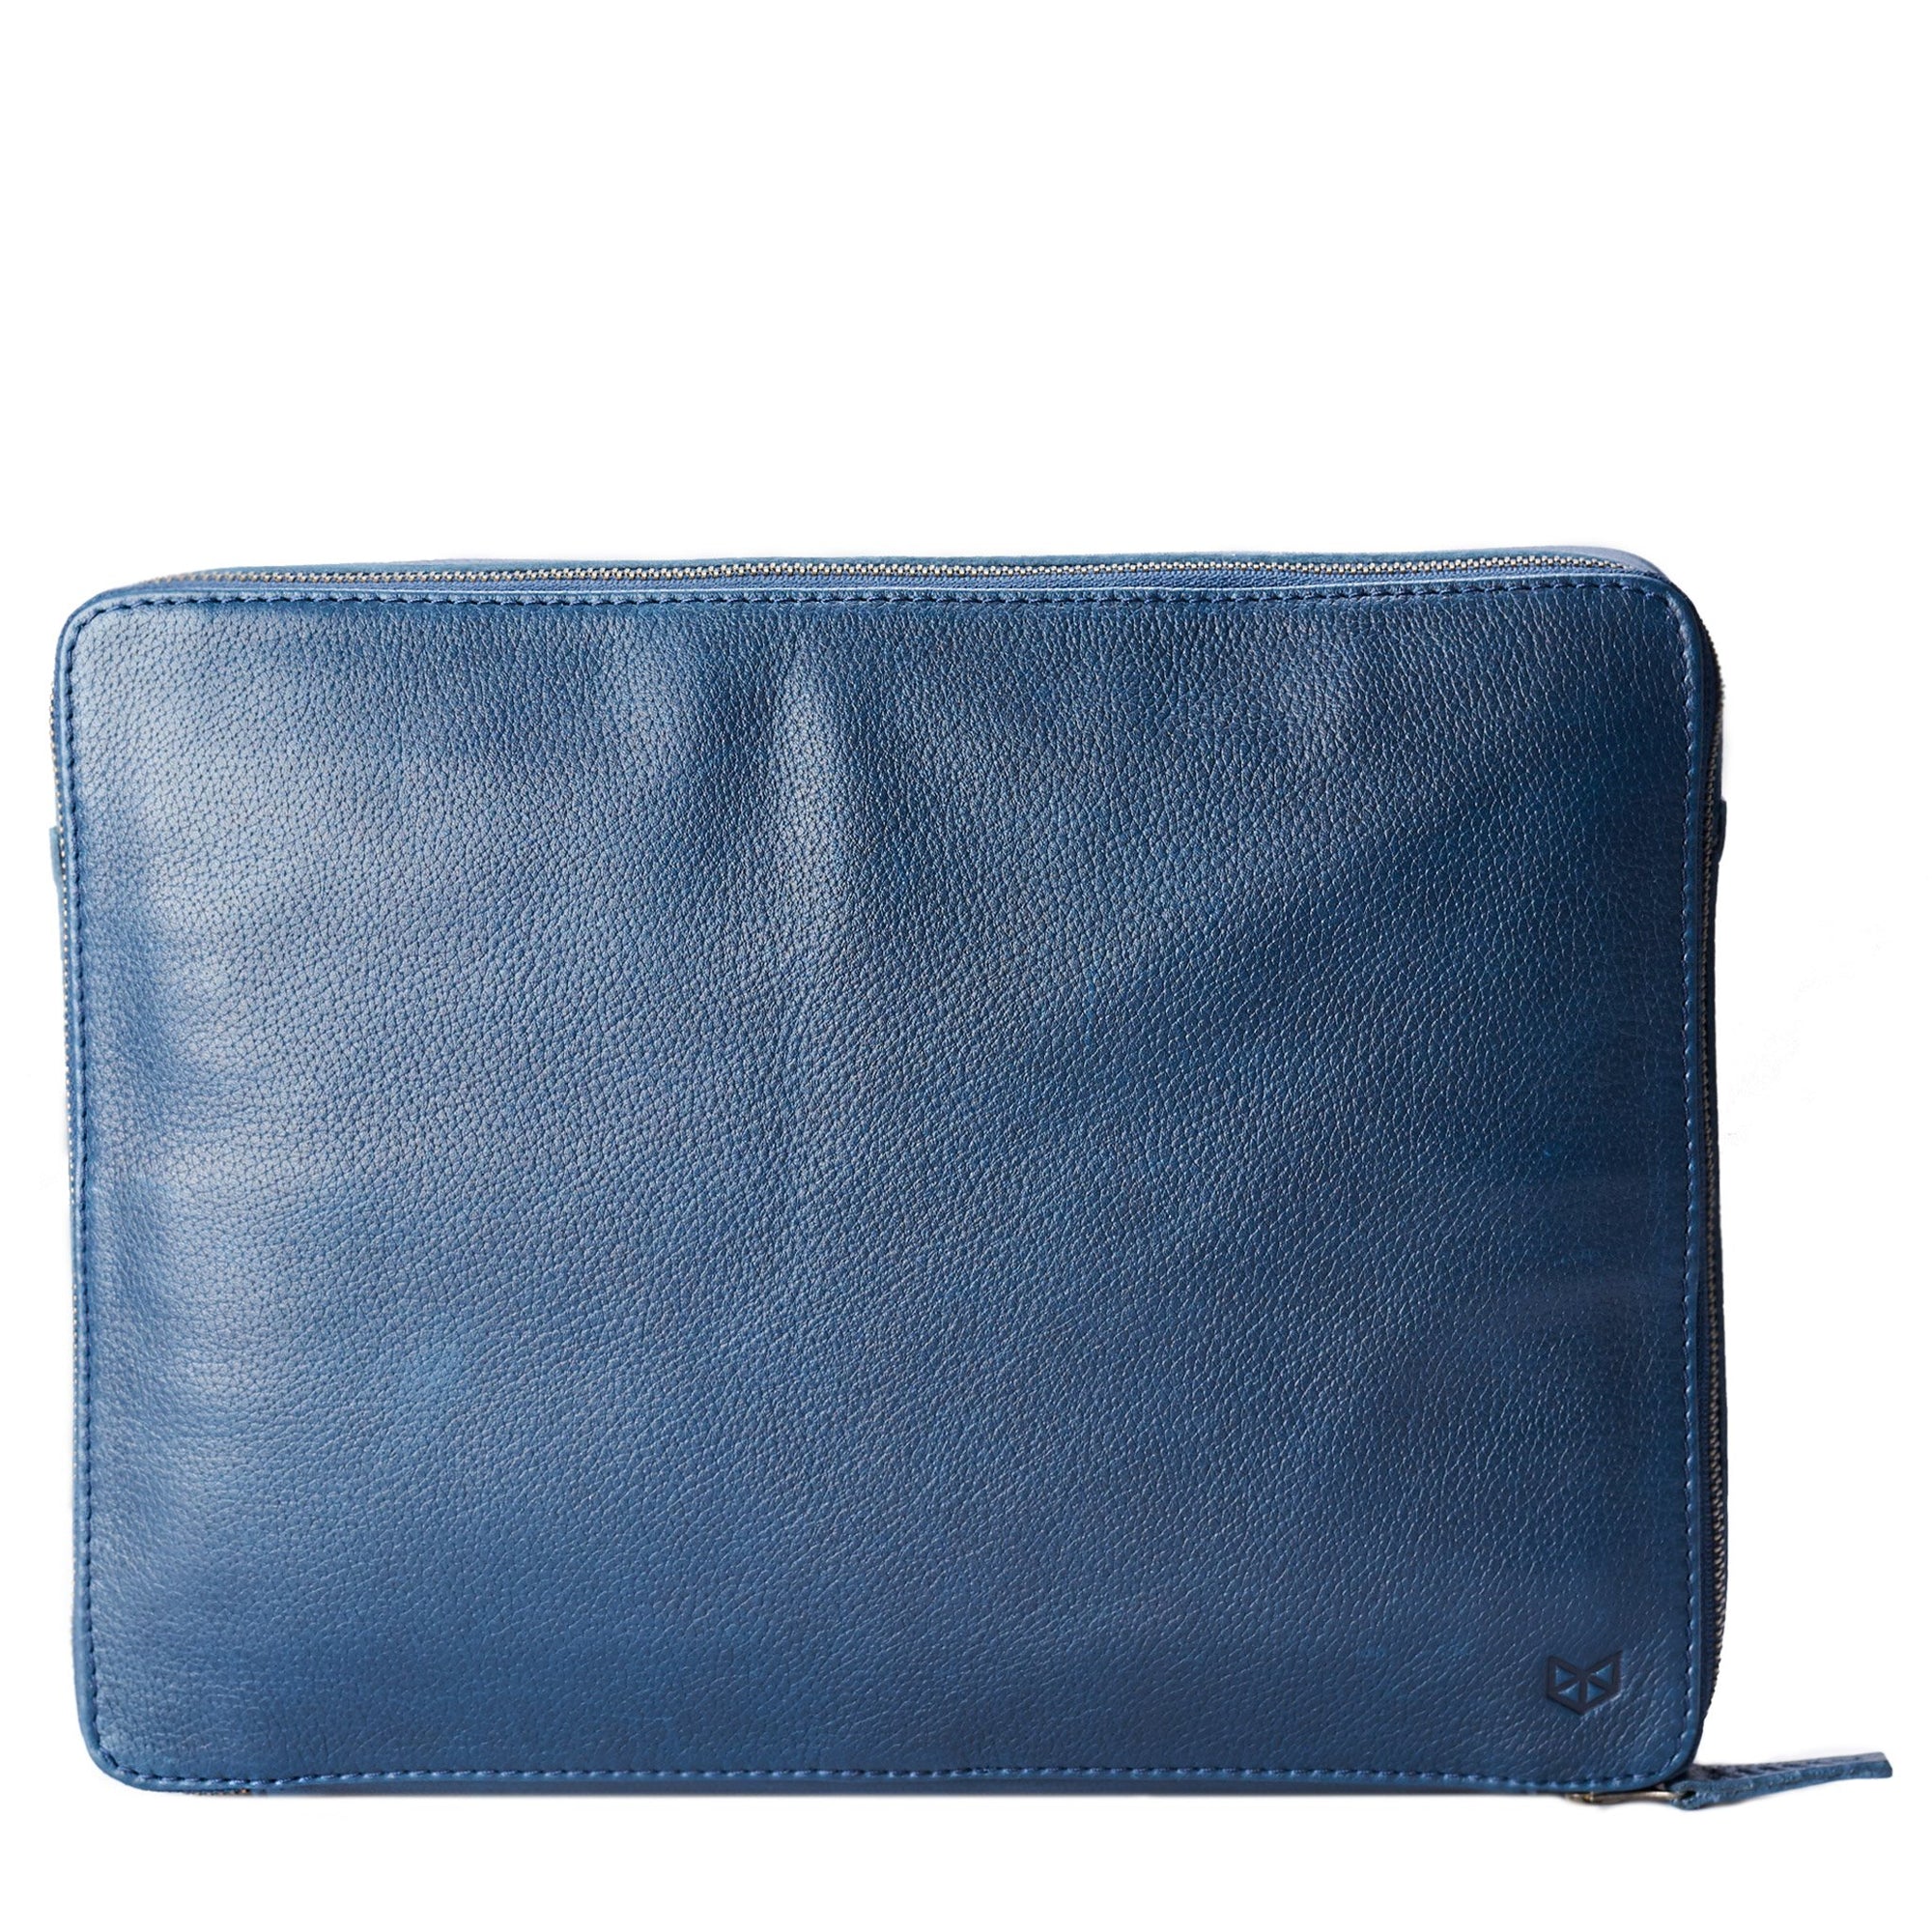 Navy blue leather tech pouch. Handmade tech gear bag by Capra Leather